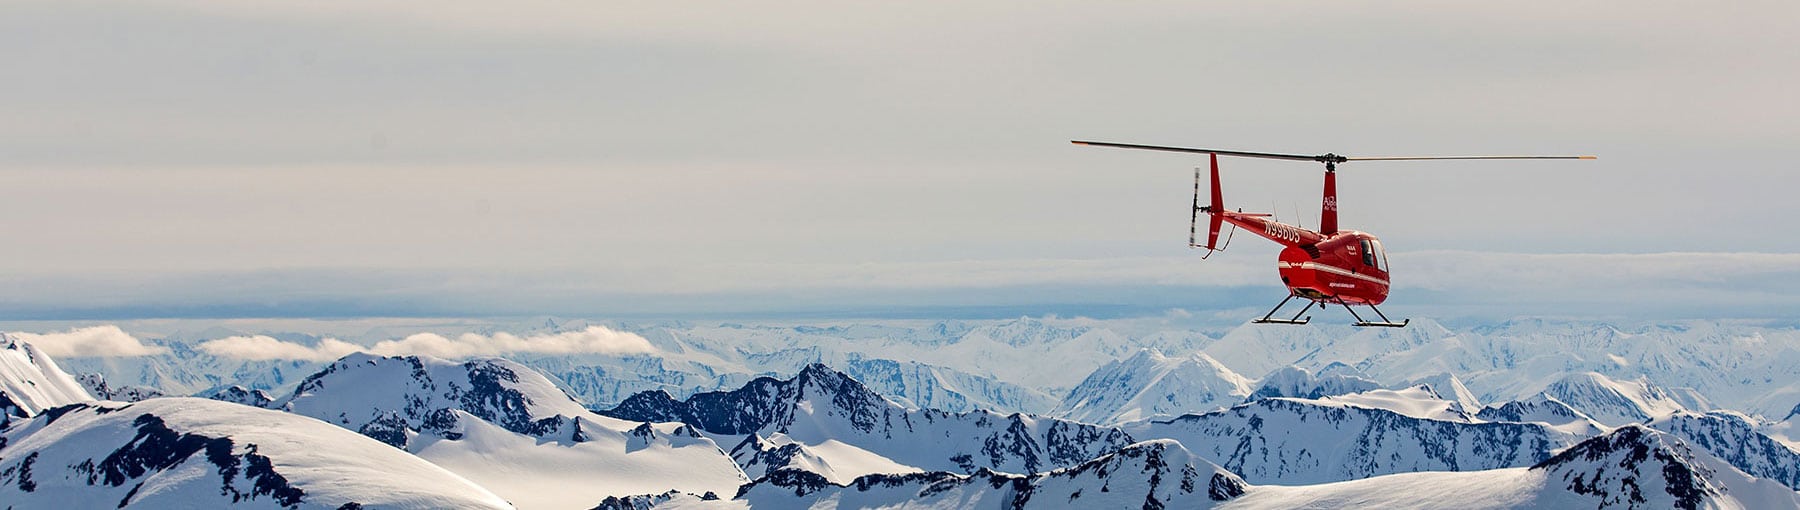 Helicopter flying away towards snowy mountains.